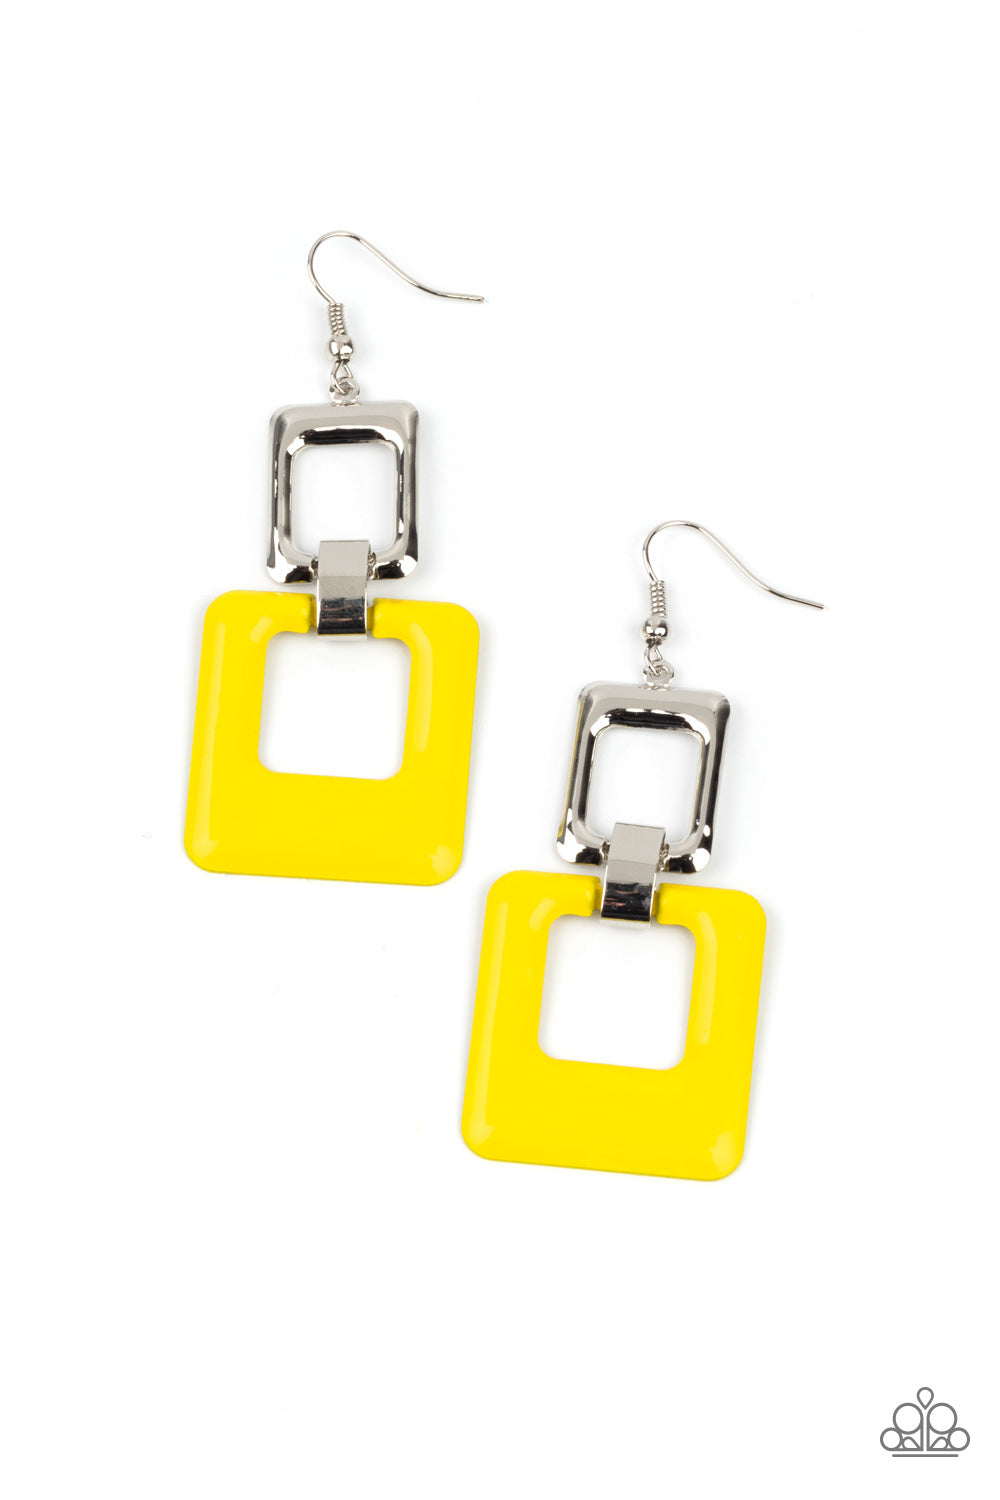 Paparazzi Accessories Twice as Nice - Yellow Fishhook Earrings a cutout square painted in the bold Pantone® of Illuminating sways from a shiny silver cutout square for a playful finish. Earring attaches to a standard fishhook fitting.